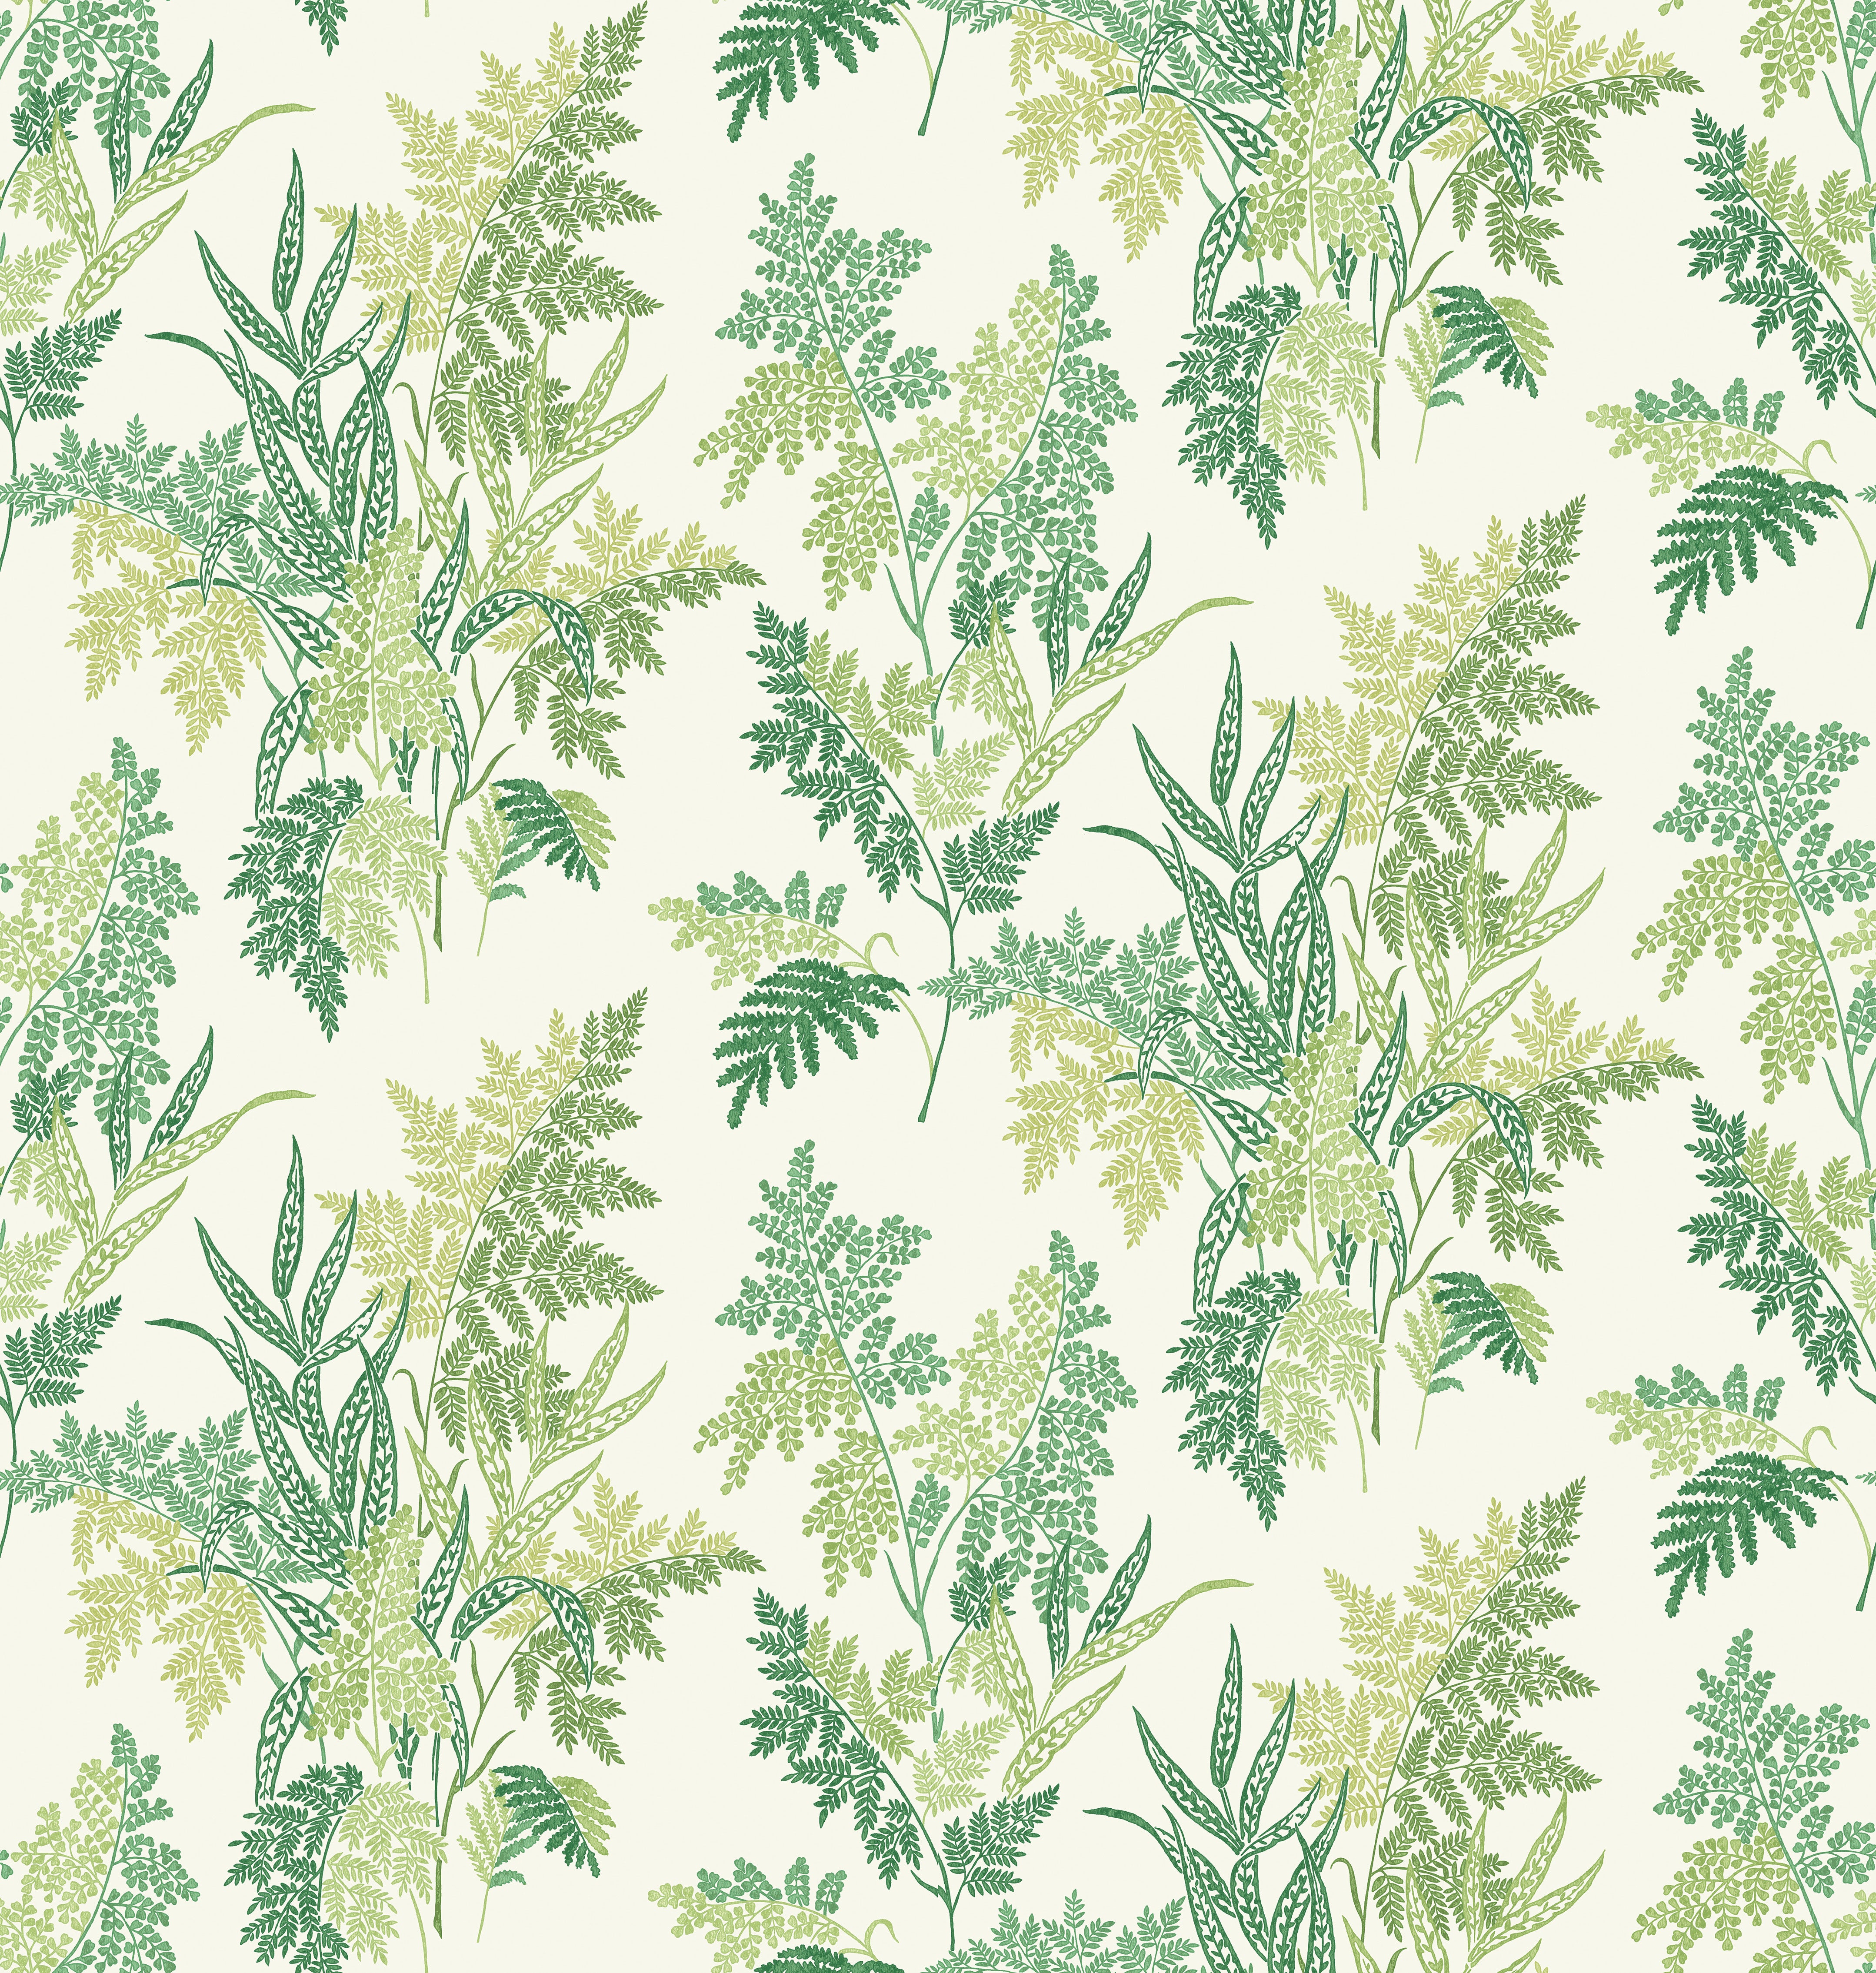 Nina Campbell Fabric - Dallimore Fern Craze Green/Lime NCF4533-01